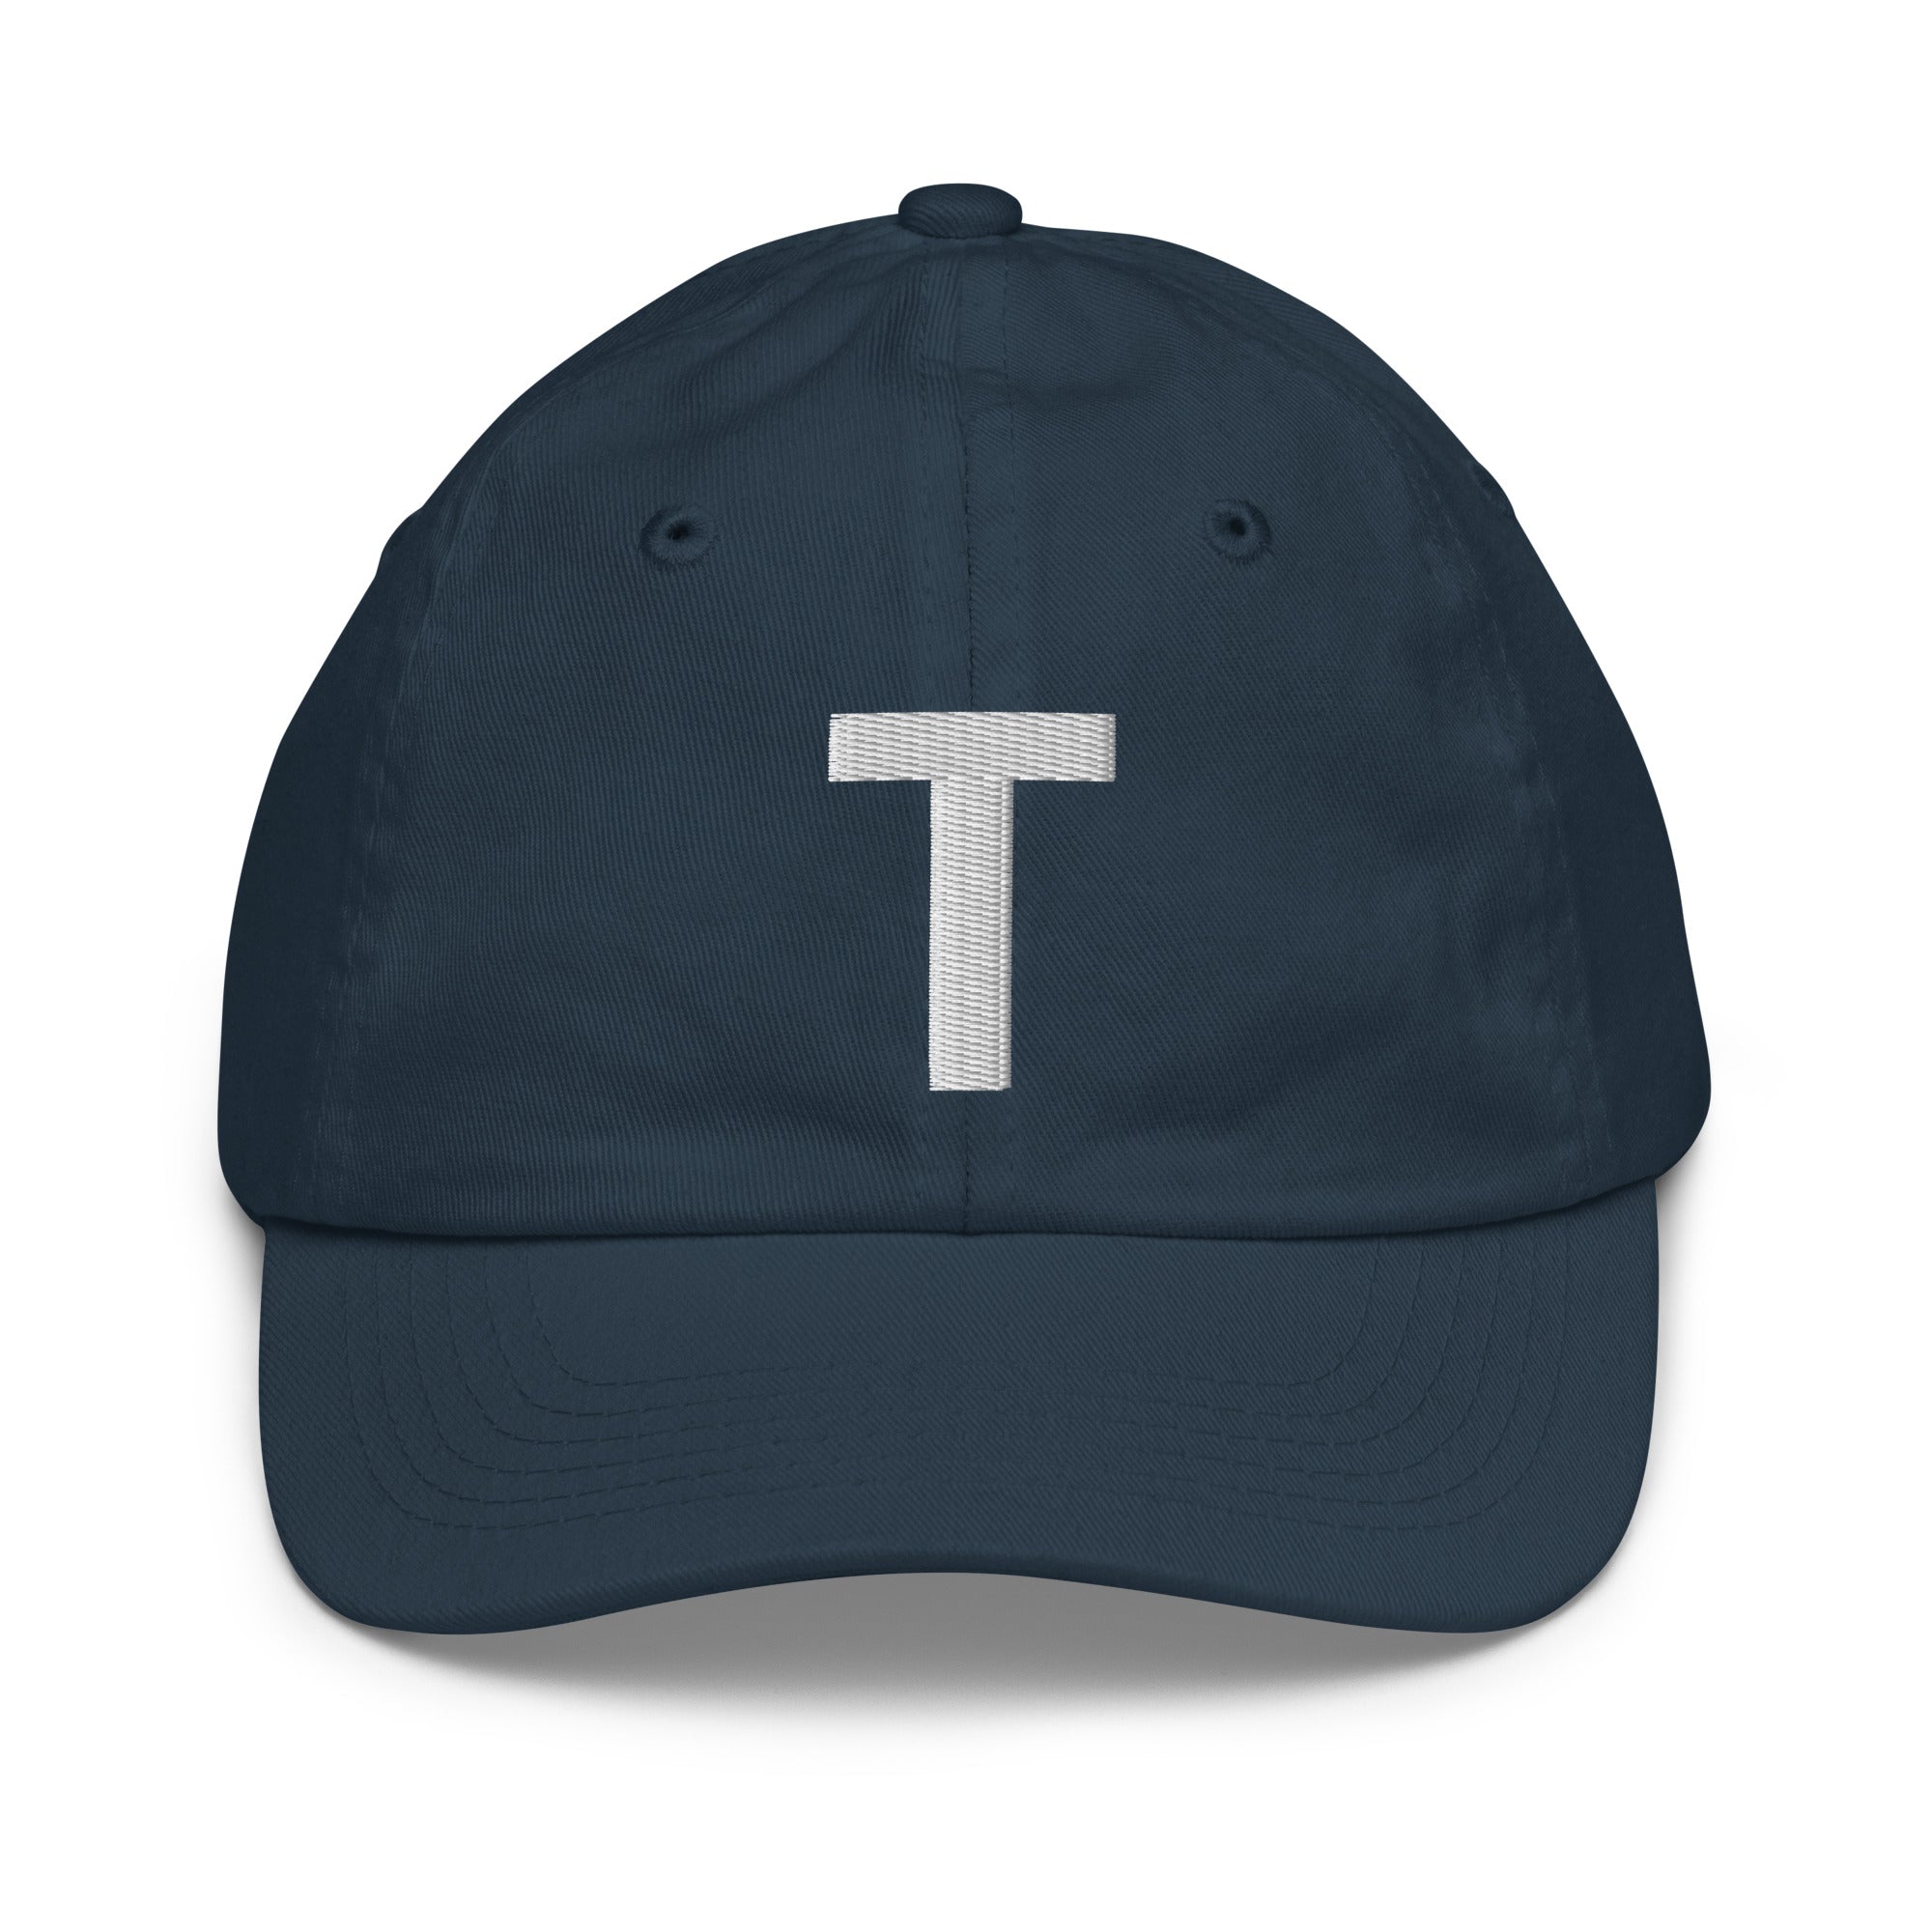 Kid's customizable hat with an initial